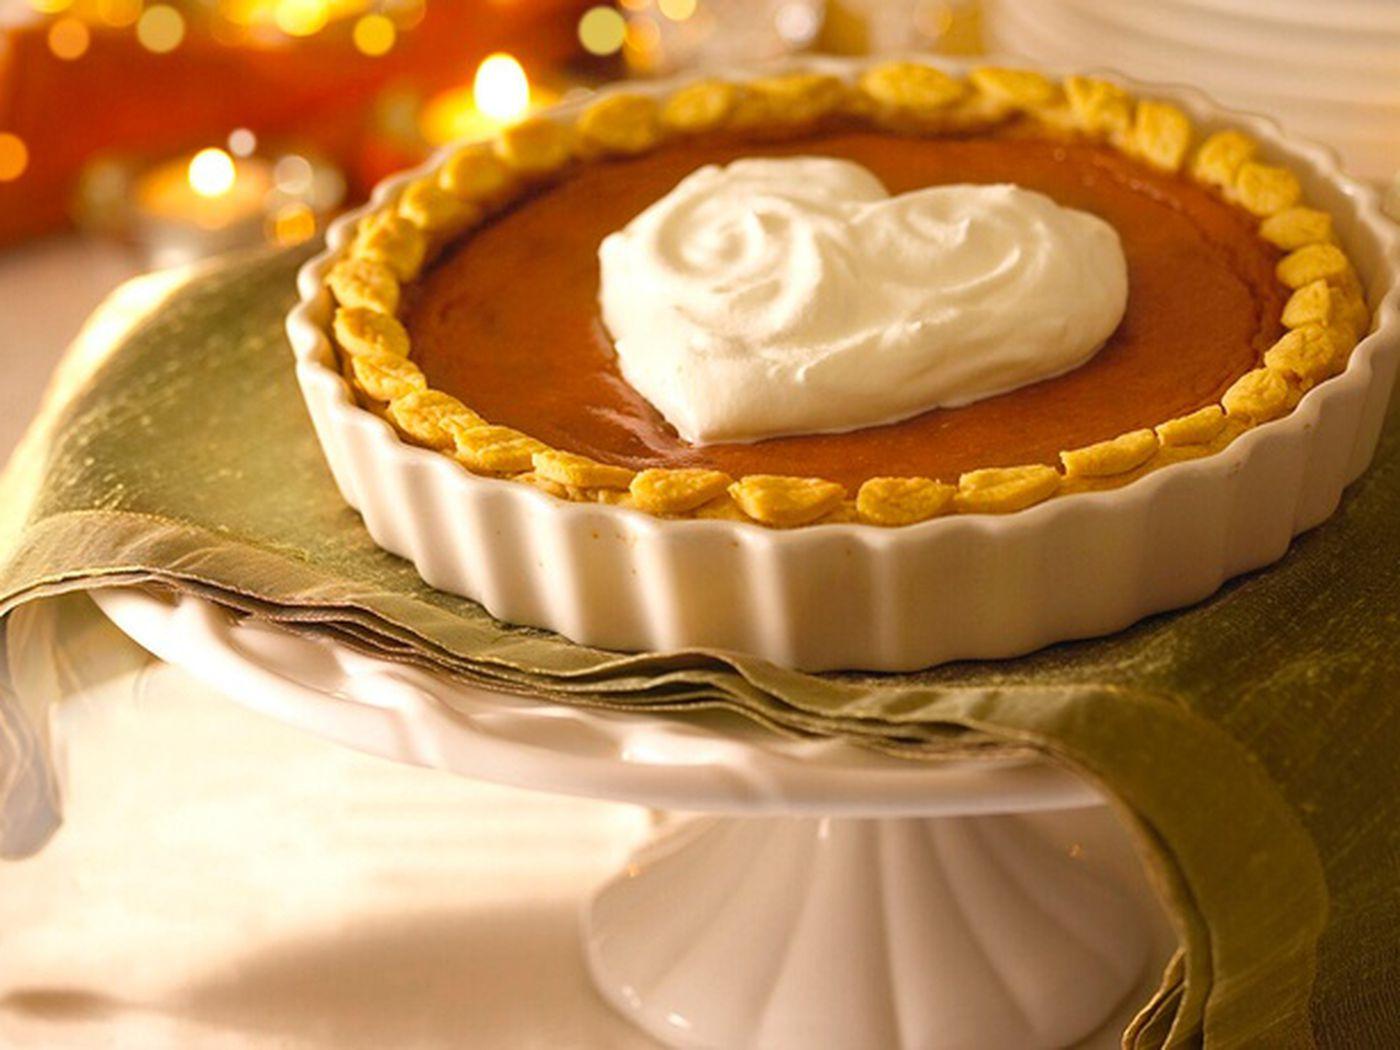 Places To Enjoy Thanksgiving Dessert This Weekend